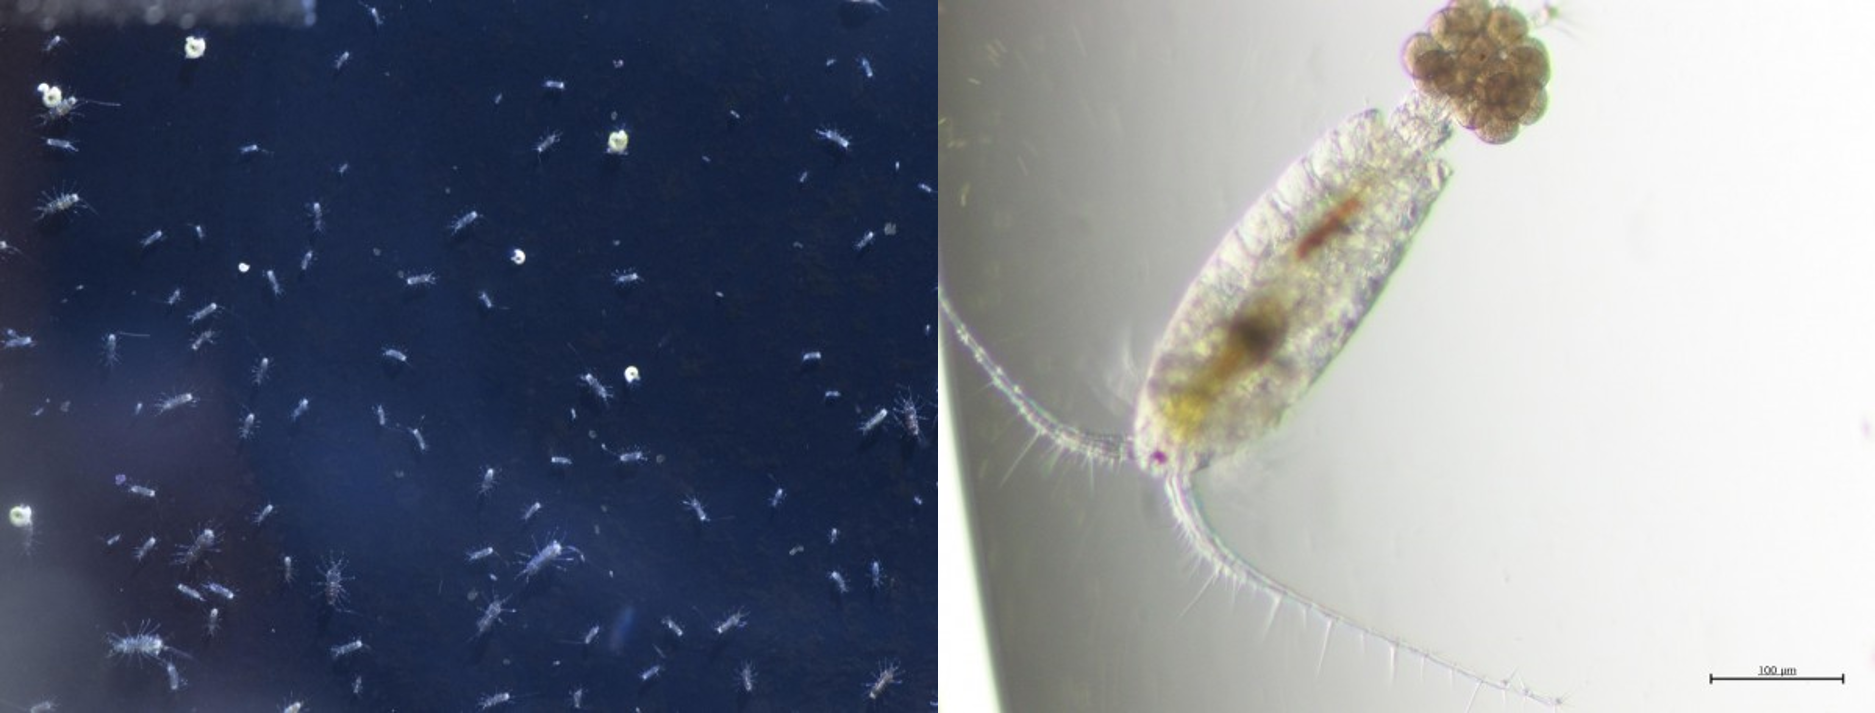 pictures of copepods